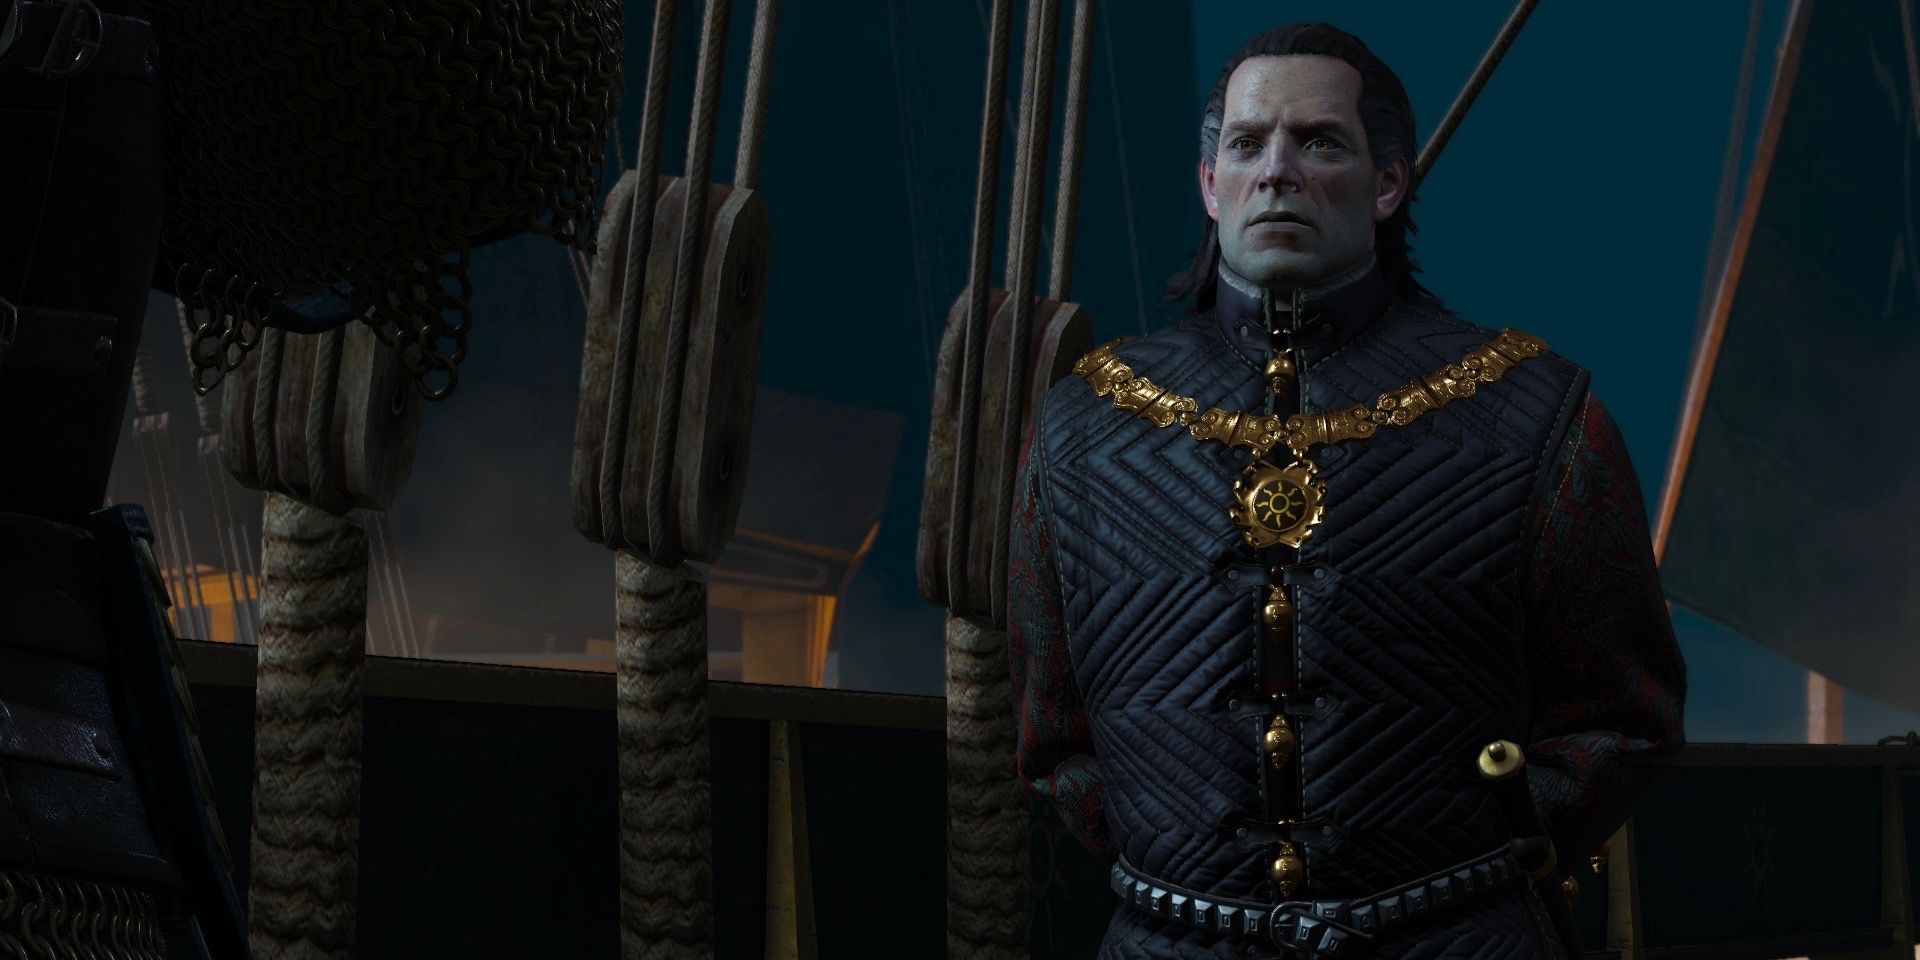 The Witcher Emhyr meets Geralt on his royal ship